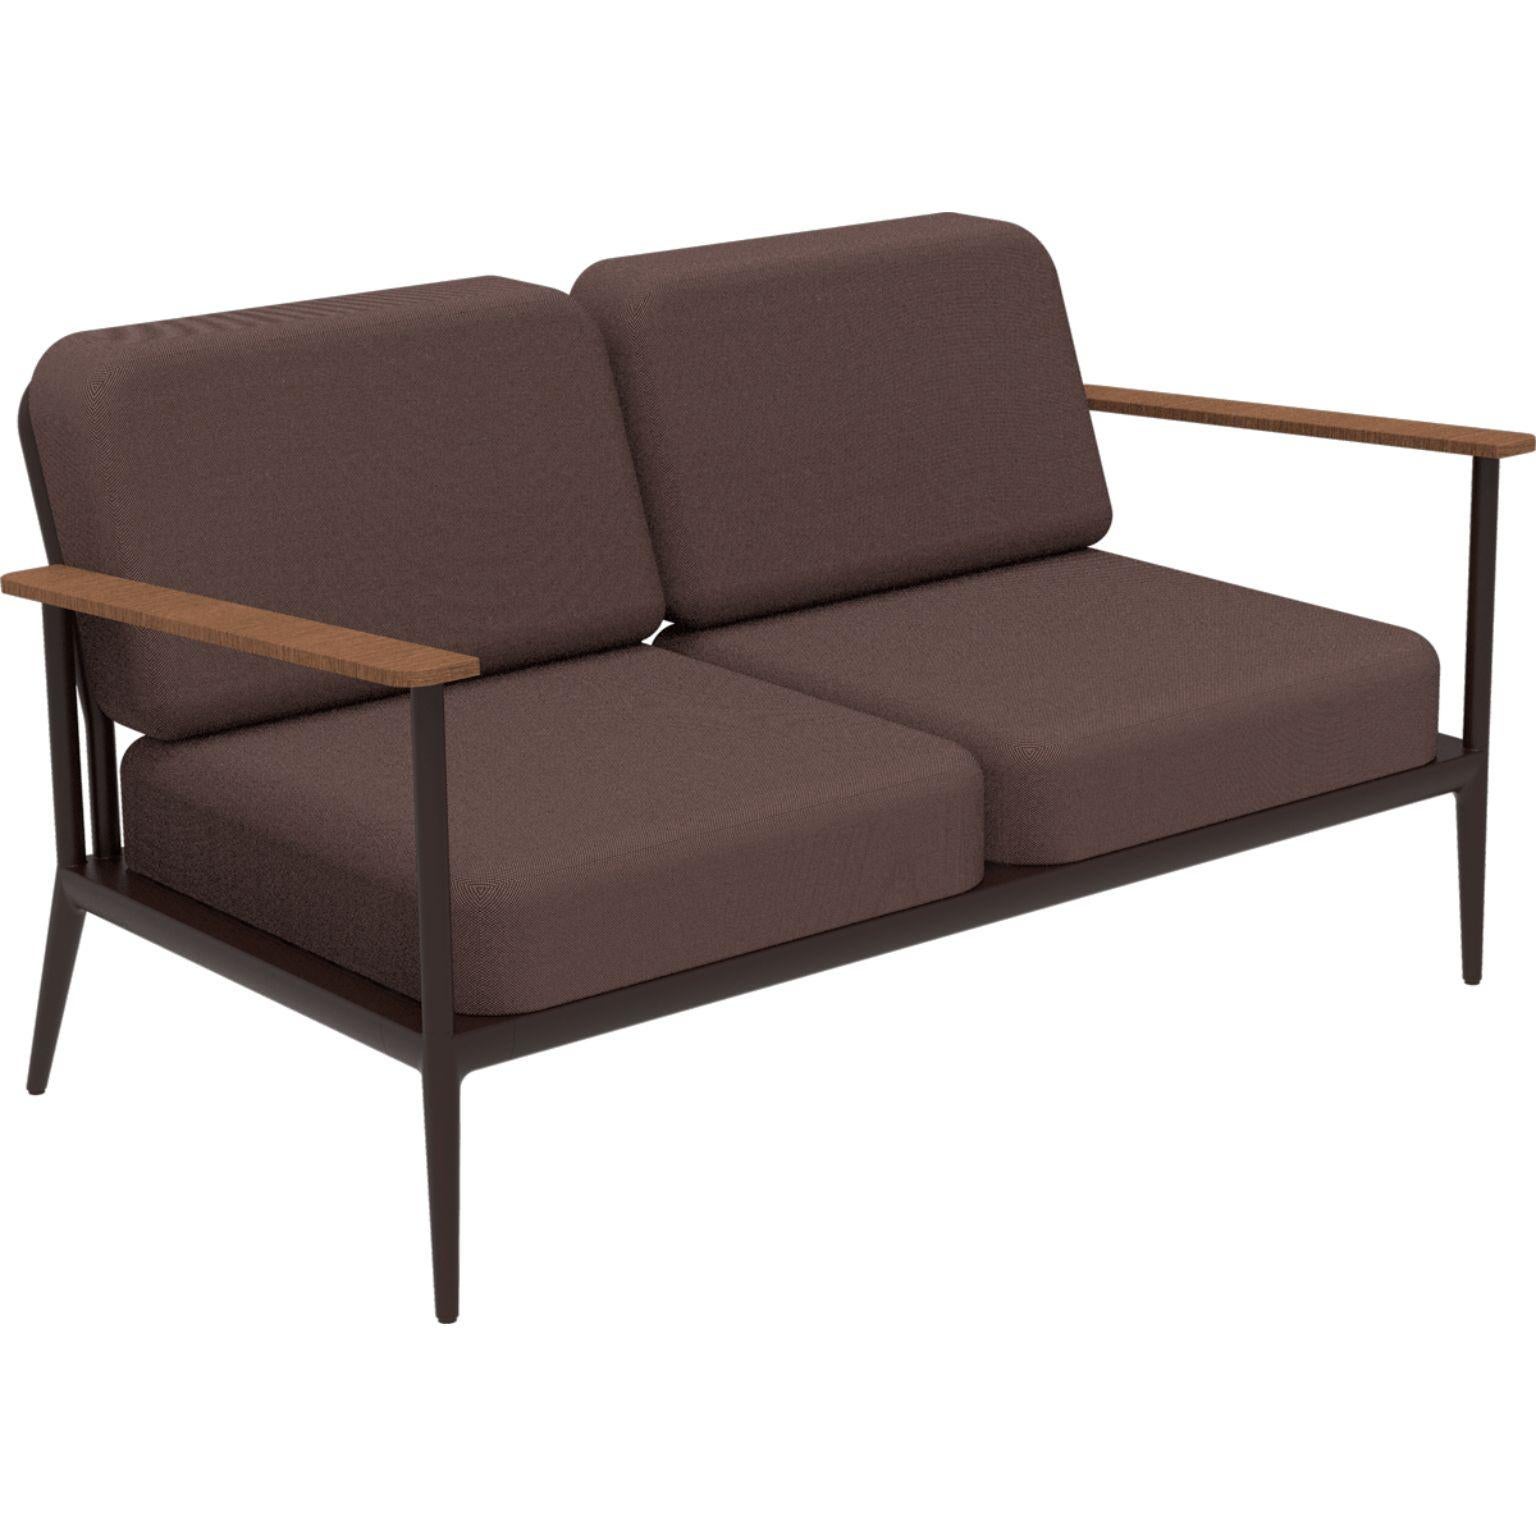 Nature chocolate sofa by MOWEE.
Dimensions: D85 x W151 x H81 cm (seat height 42 cm).
Material: aluminum, upholstery and Iroko Wood.
Weight: 32 kg.
Also available in different colors and finishes.

An unmistakable collection for its beauty and